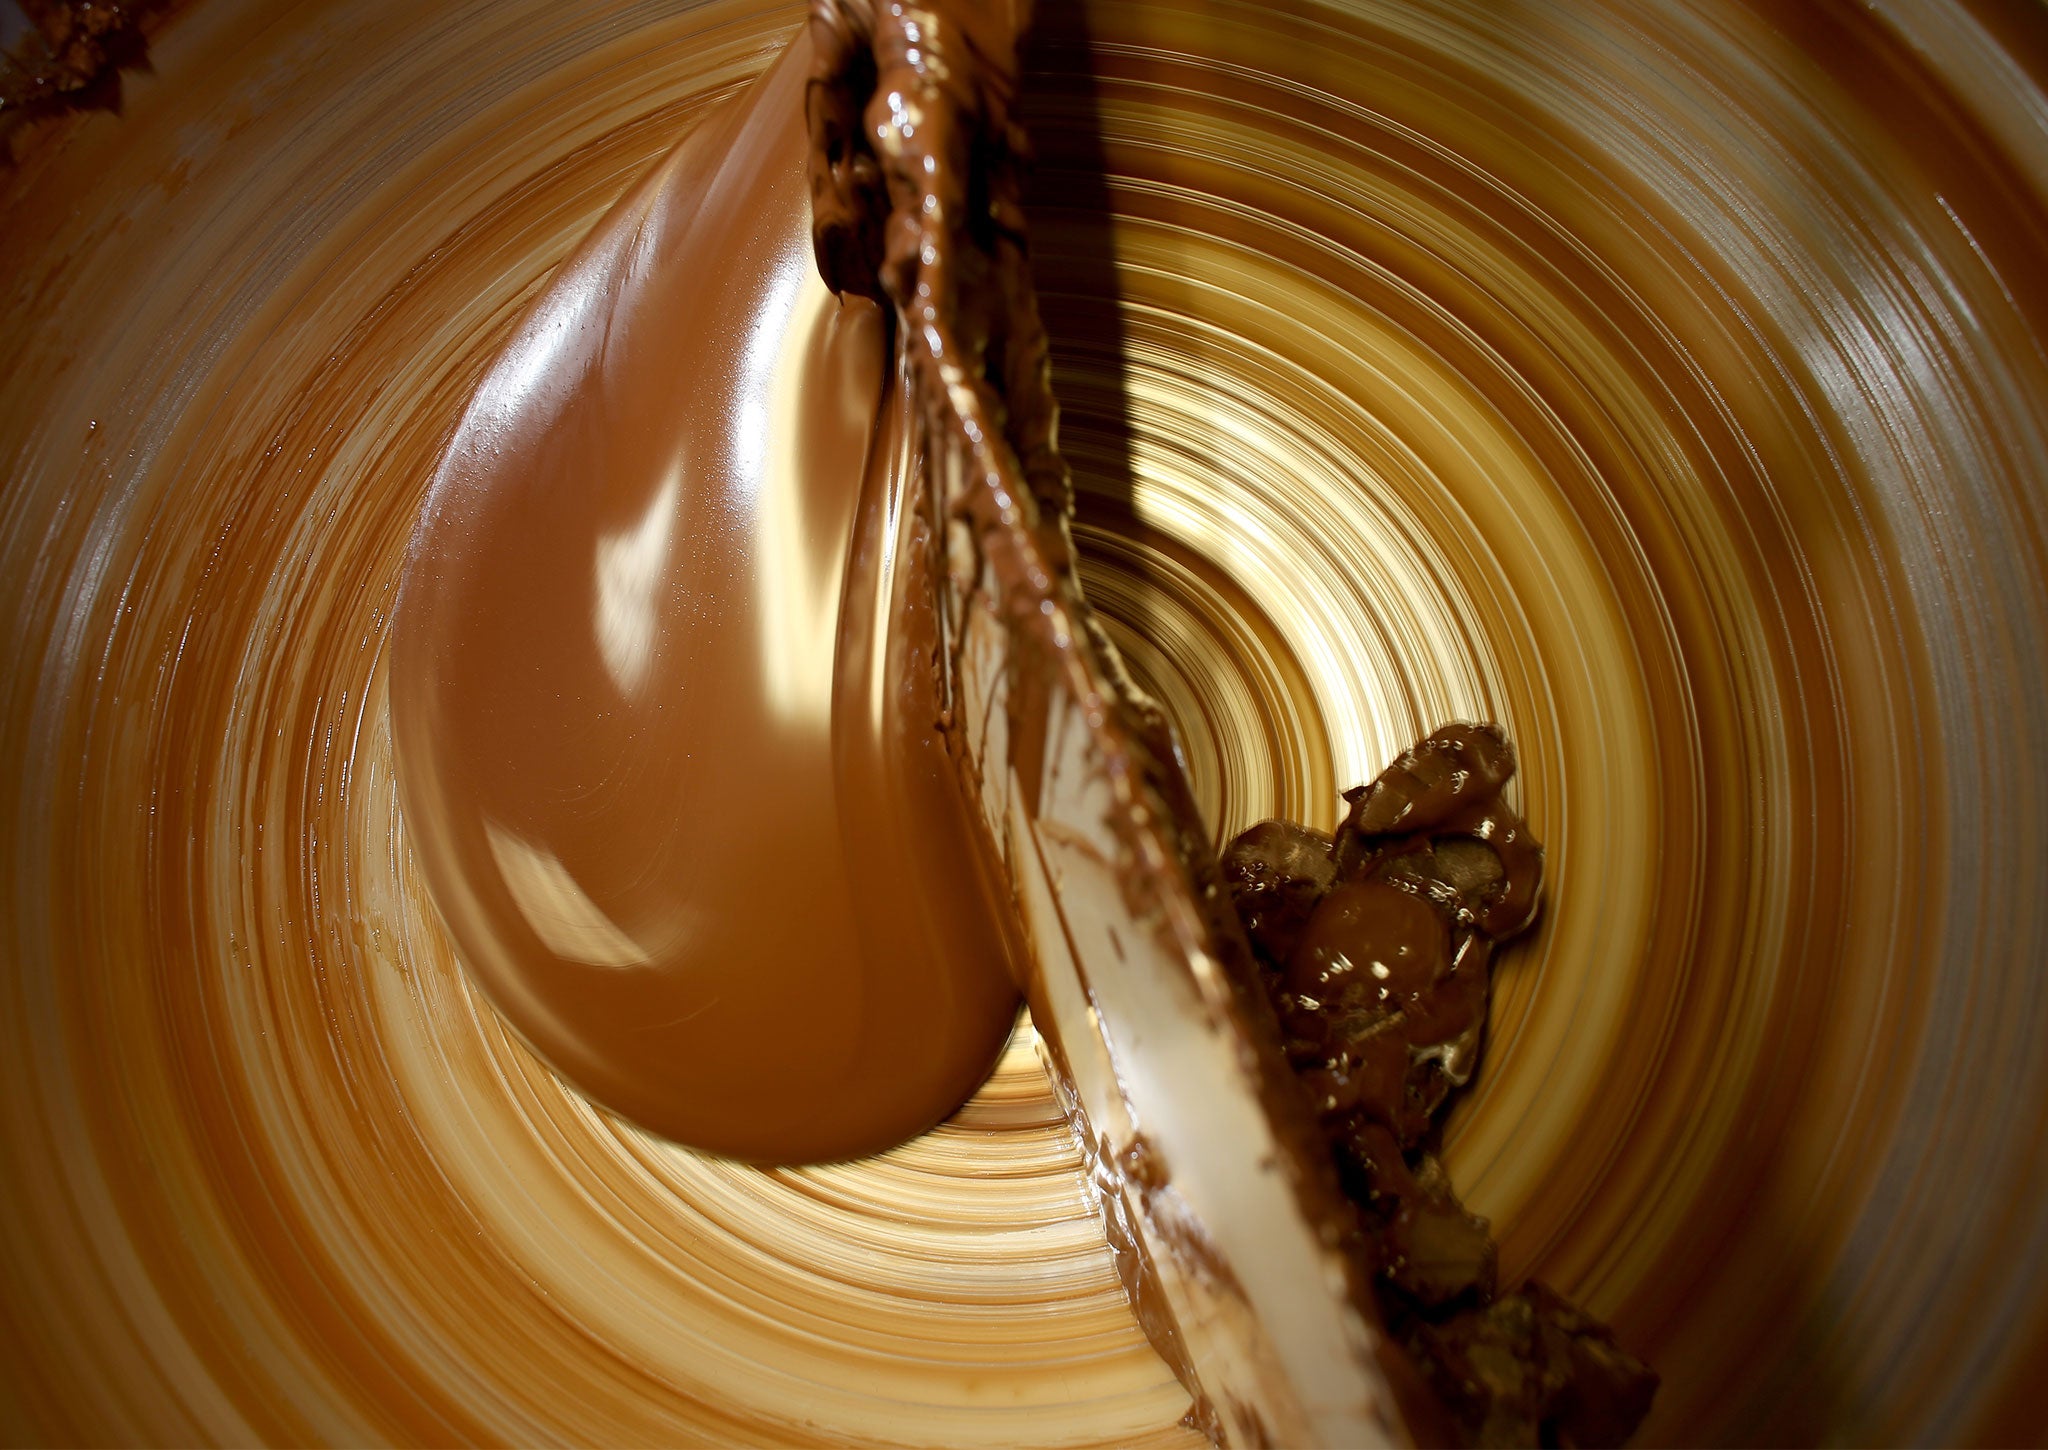 Cambridge University is offering a PHD for someone willing to study chocolate